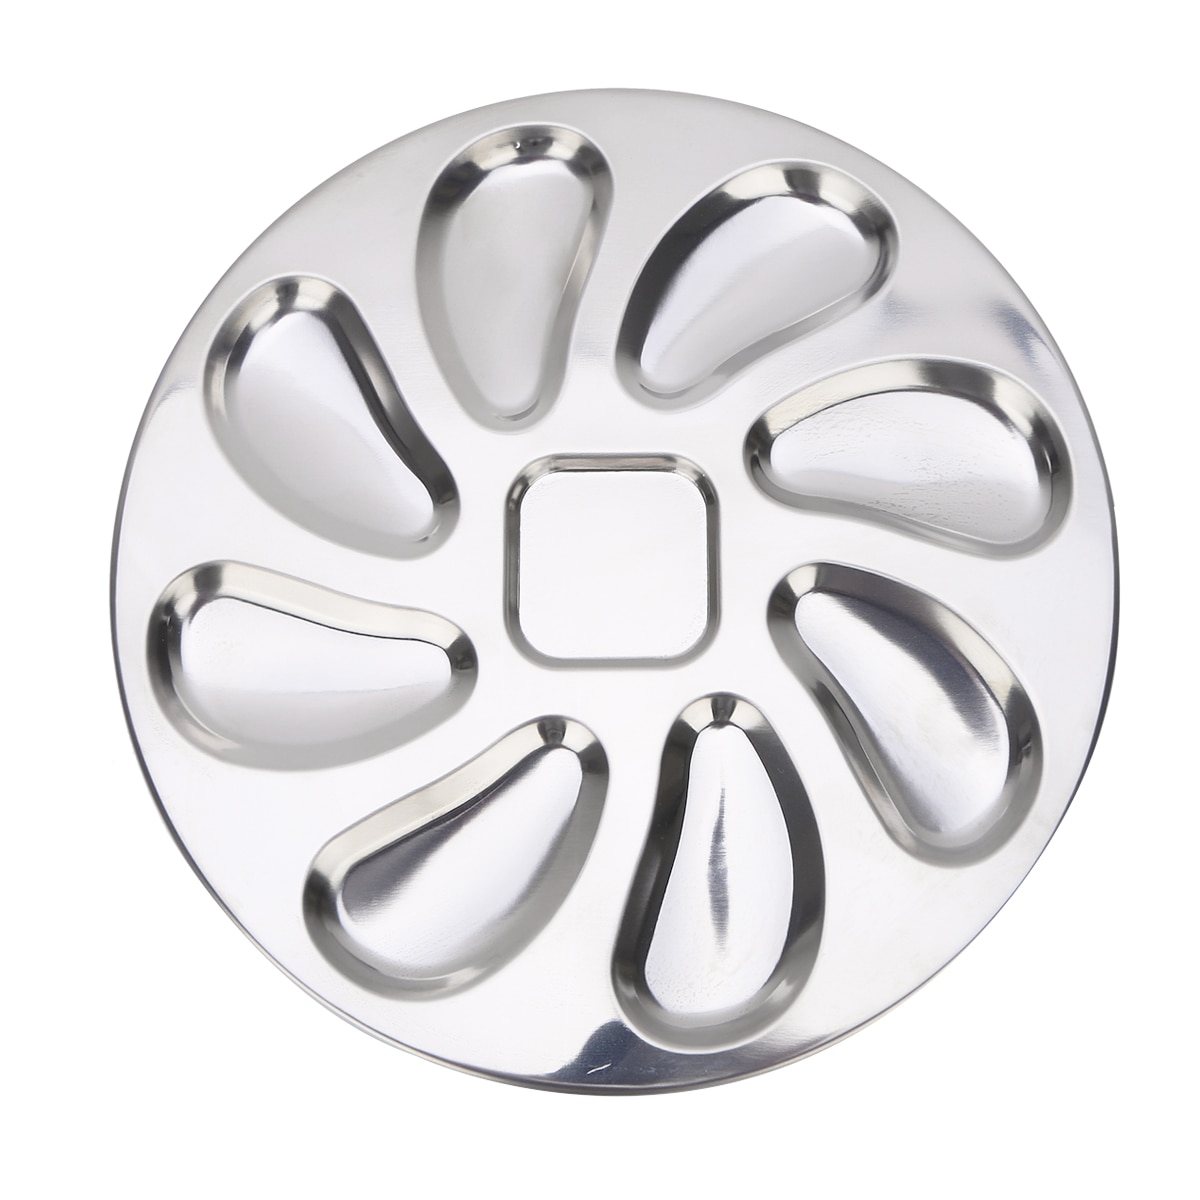 Oyster Shell Shaped Plate 8 Slots Stainless Steel Oyster Serving ...